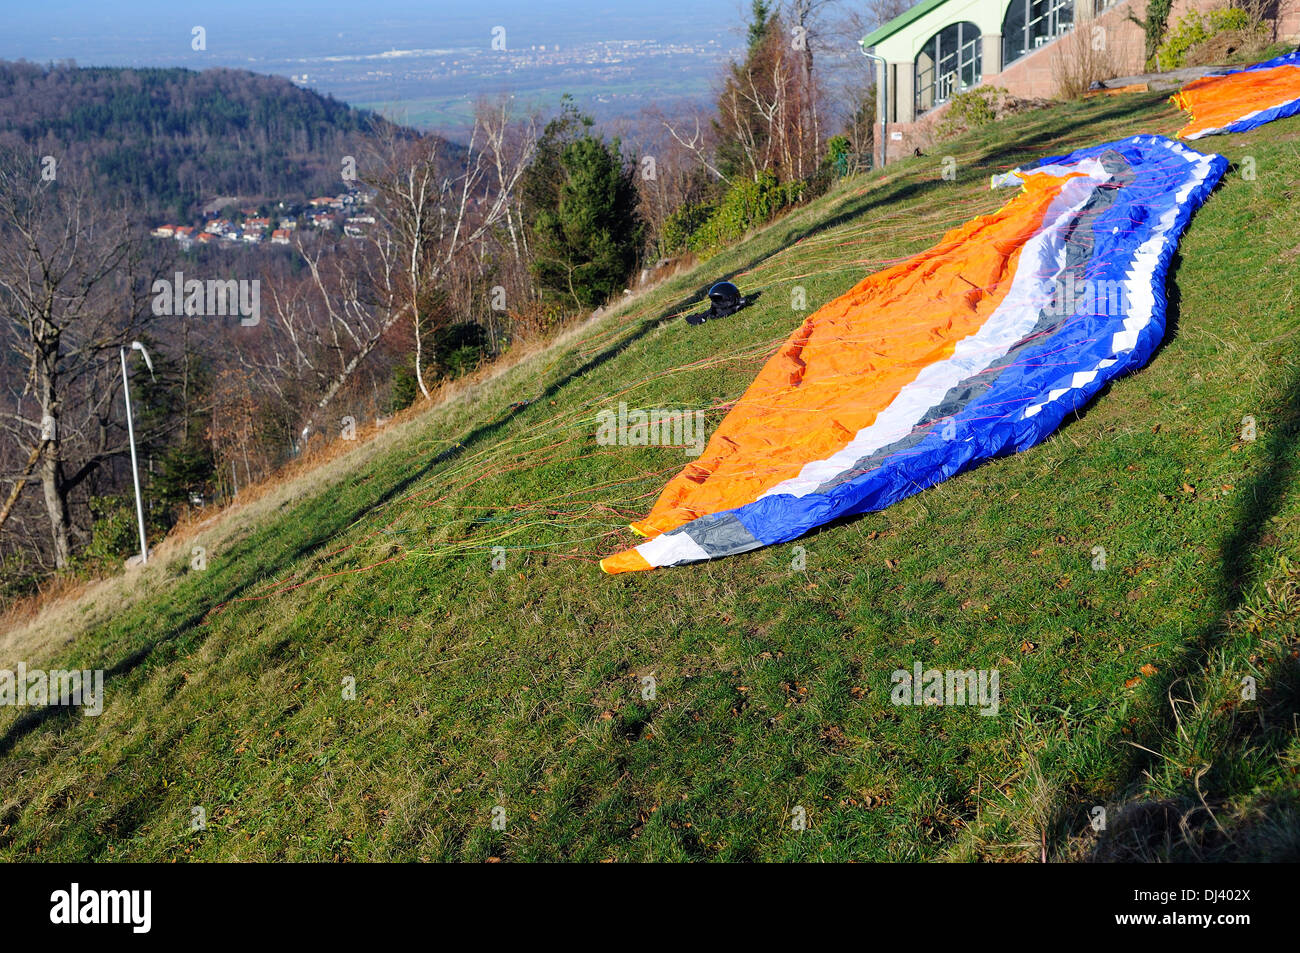 Start preparations for paragliding Stock Photo